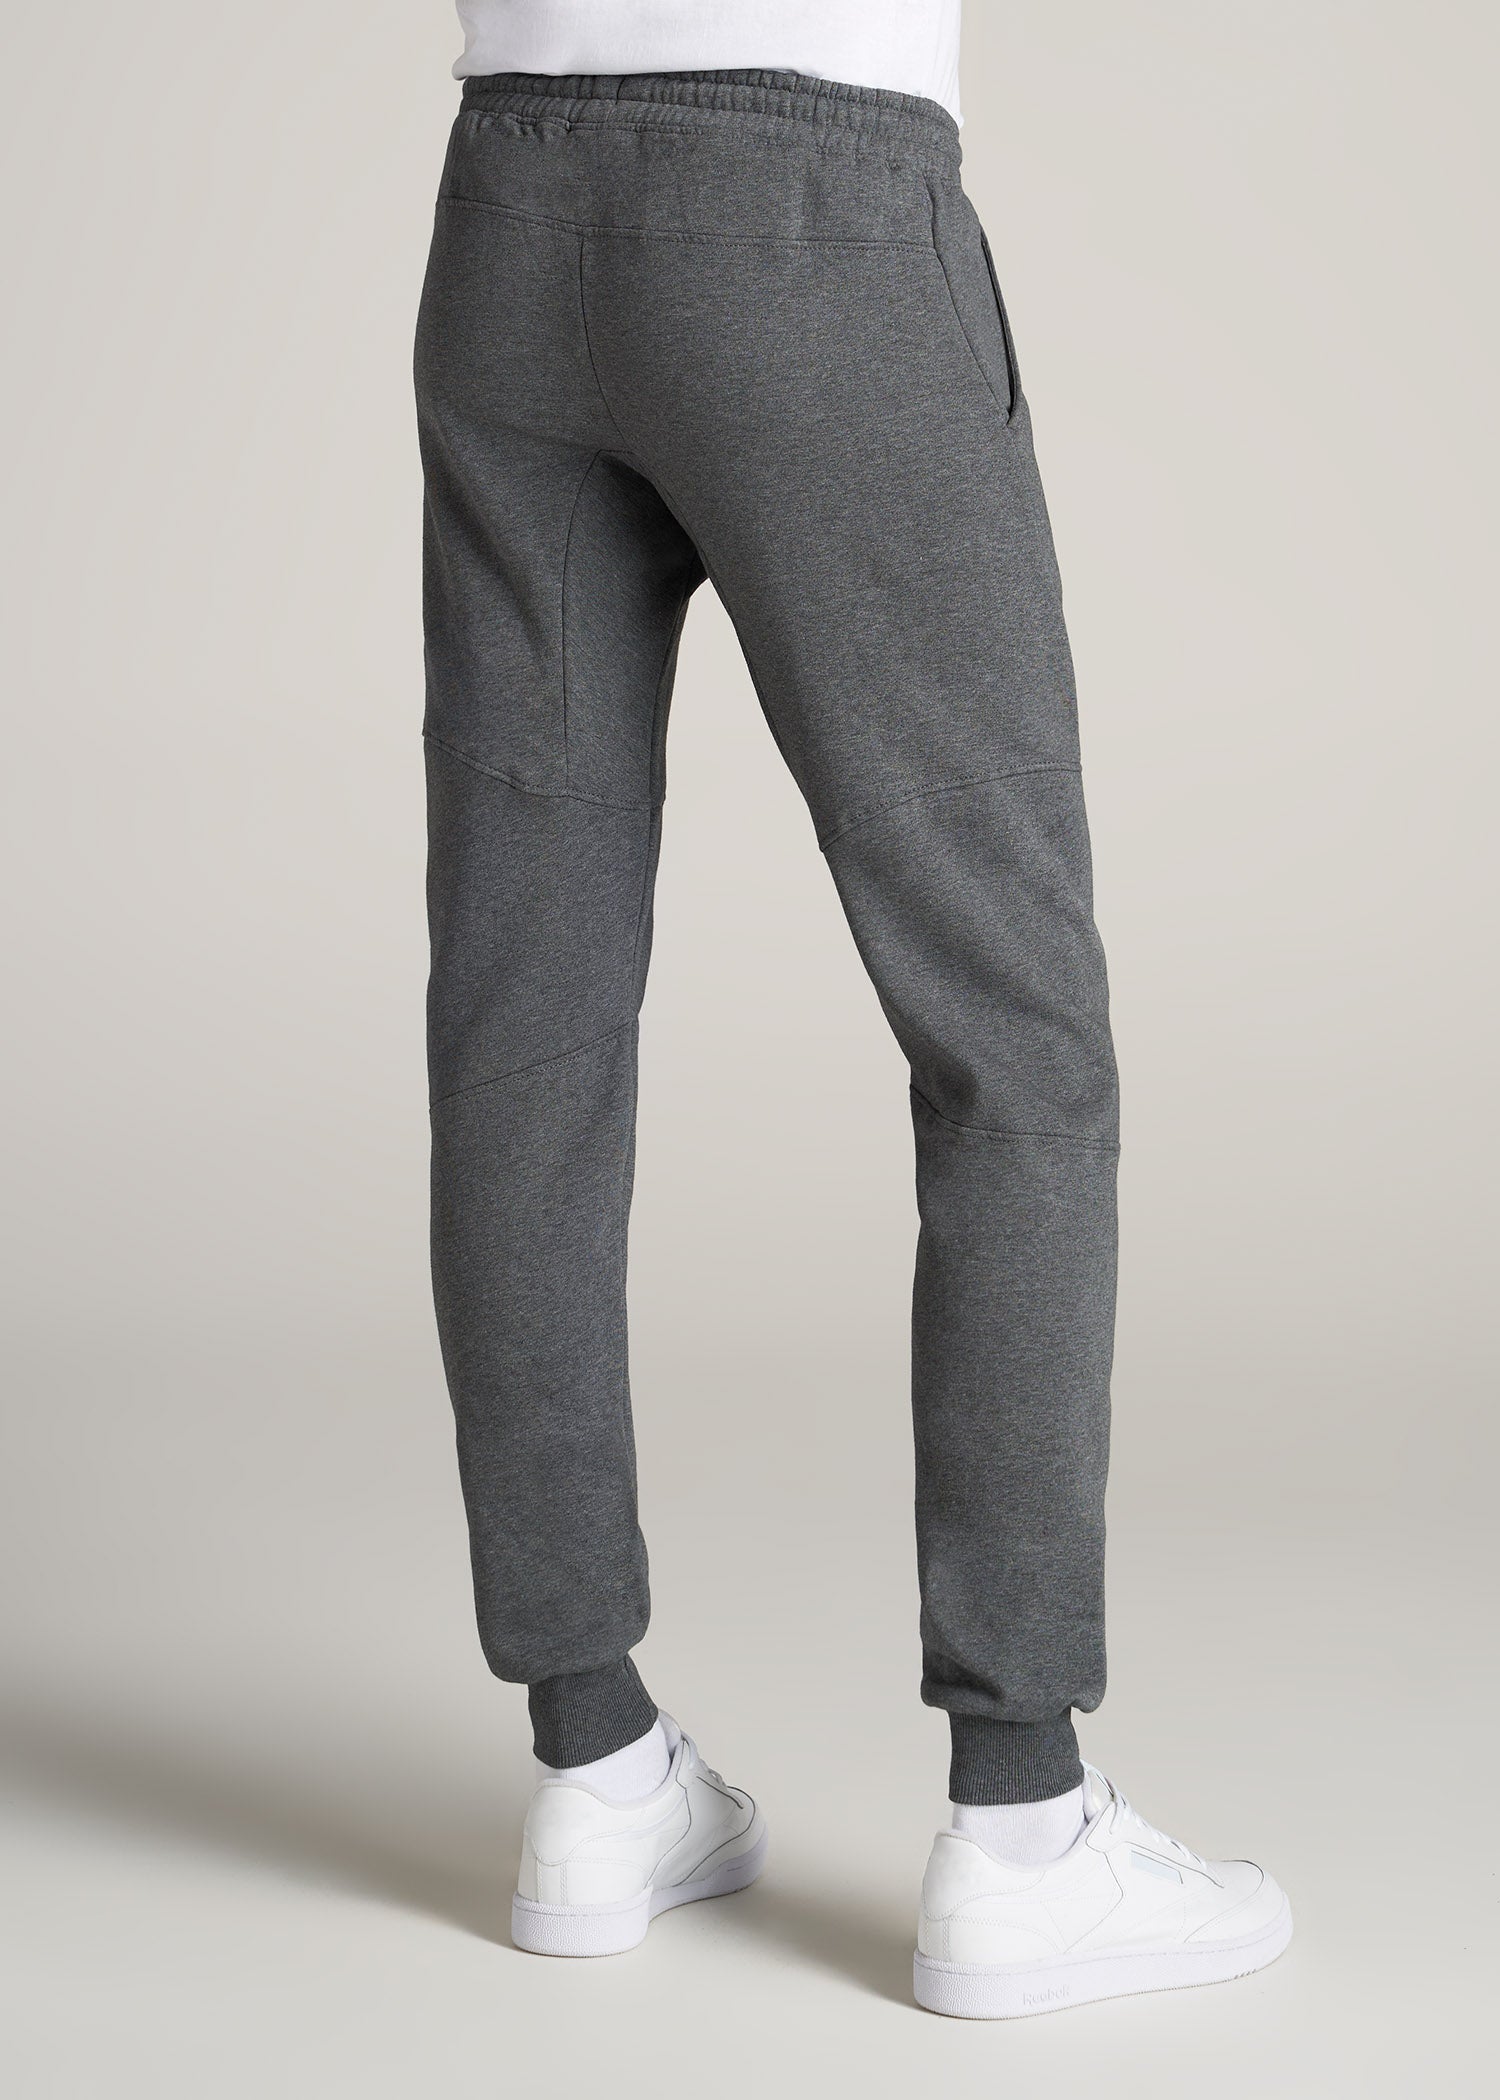 Buy Charcoal Grey Cuffed Joggers from Next USA